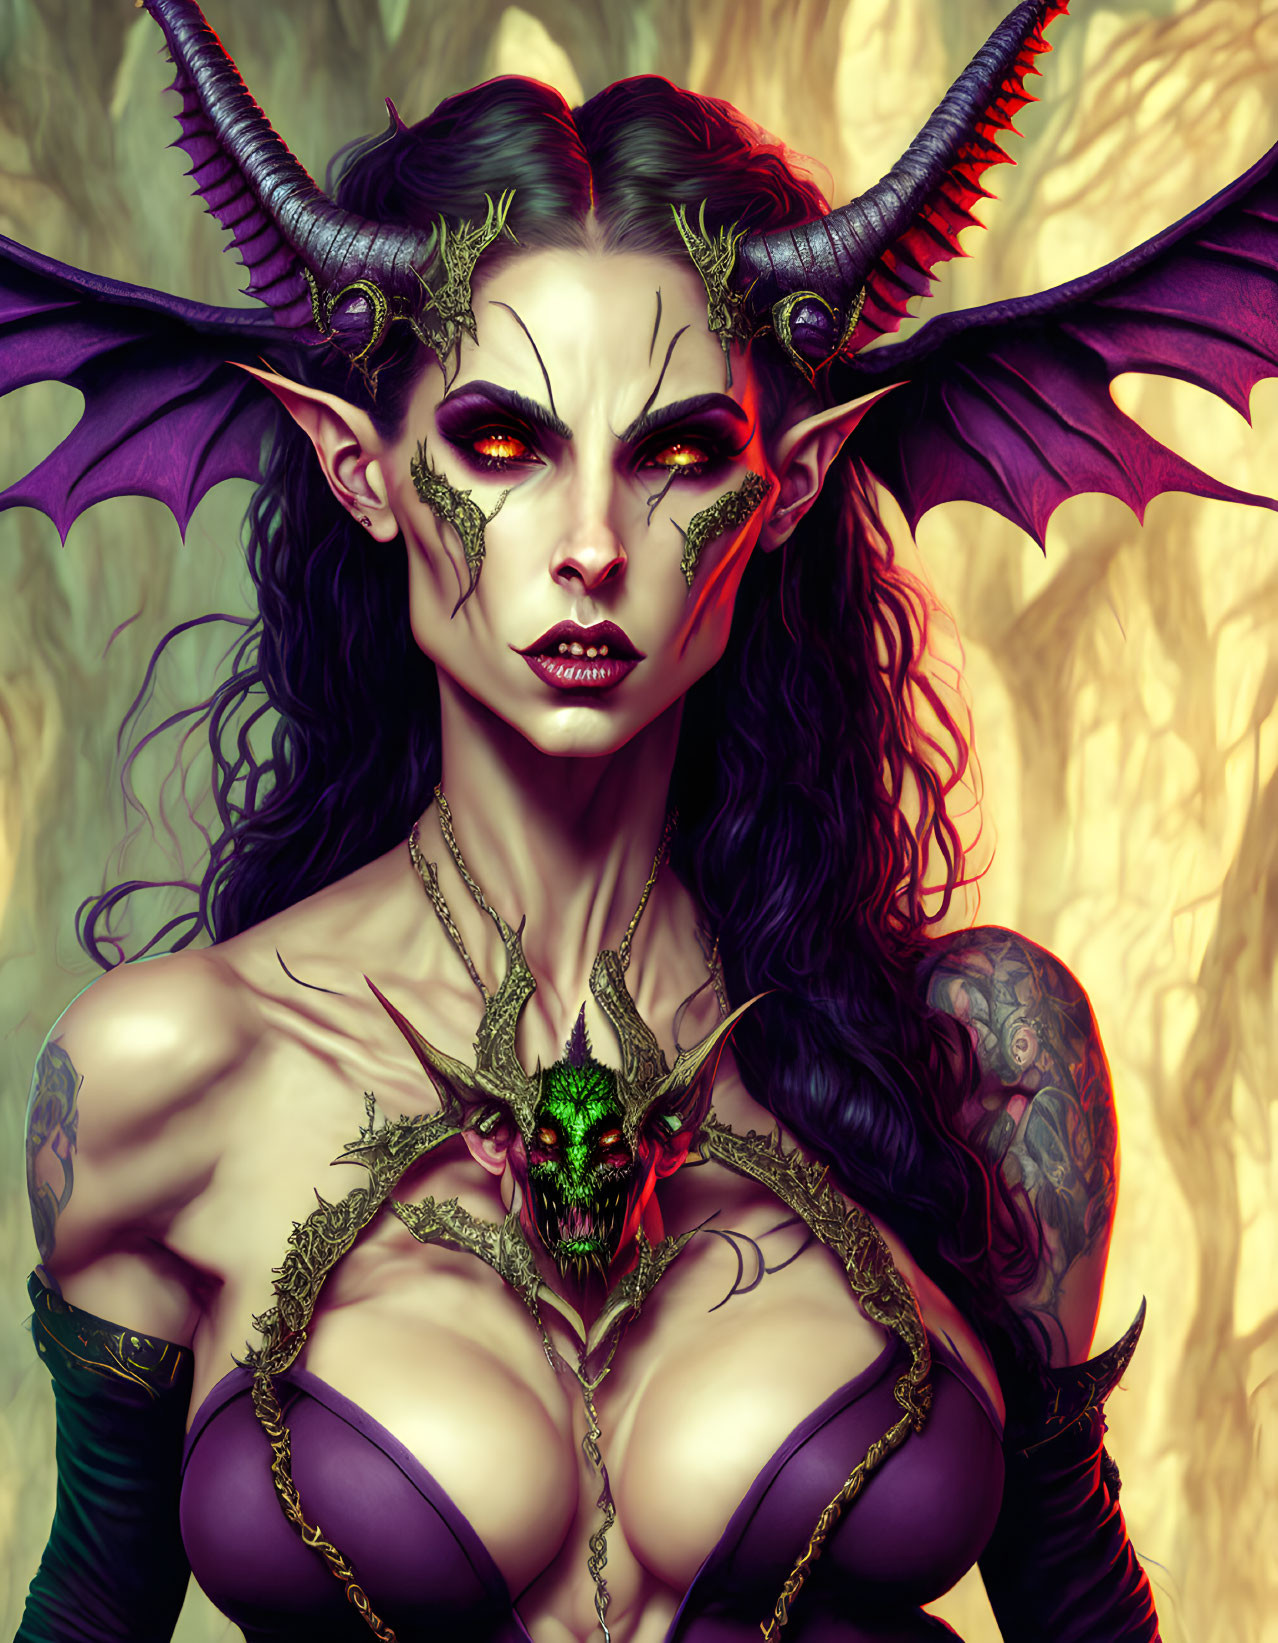 Female fantasy creature with horns, dragon wings, red eyes, and tattoos in fiery setting